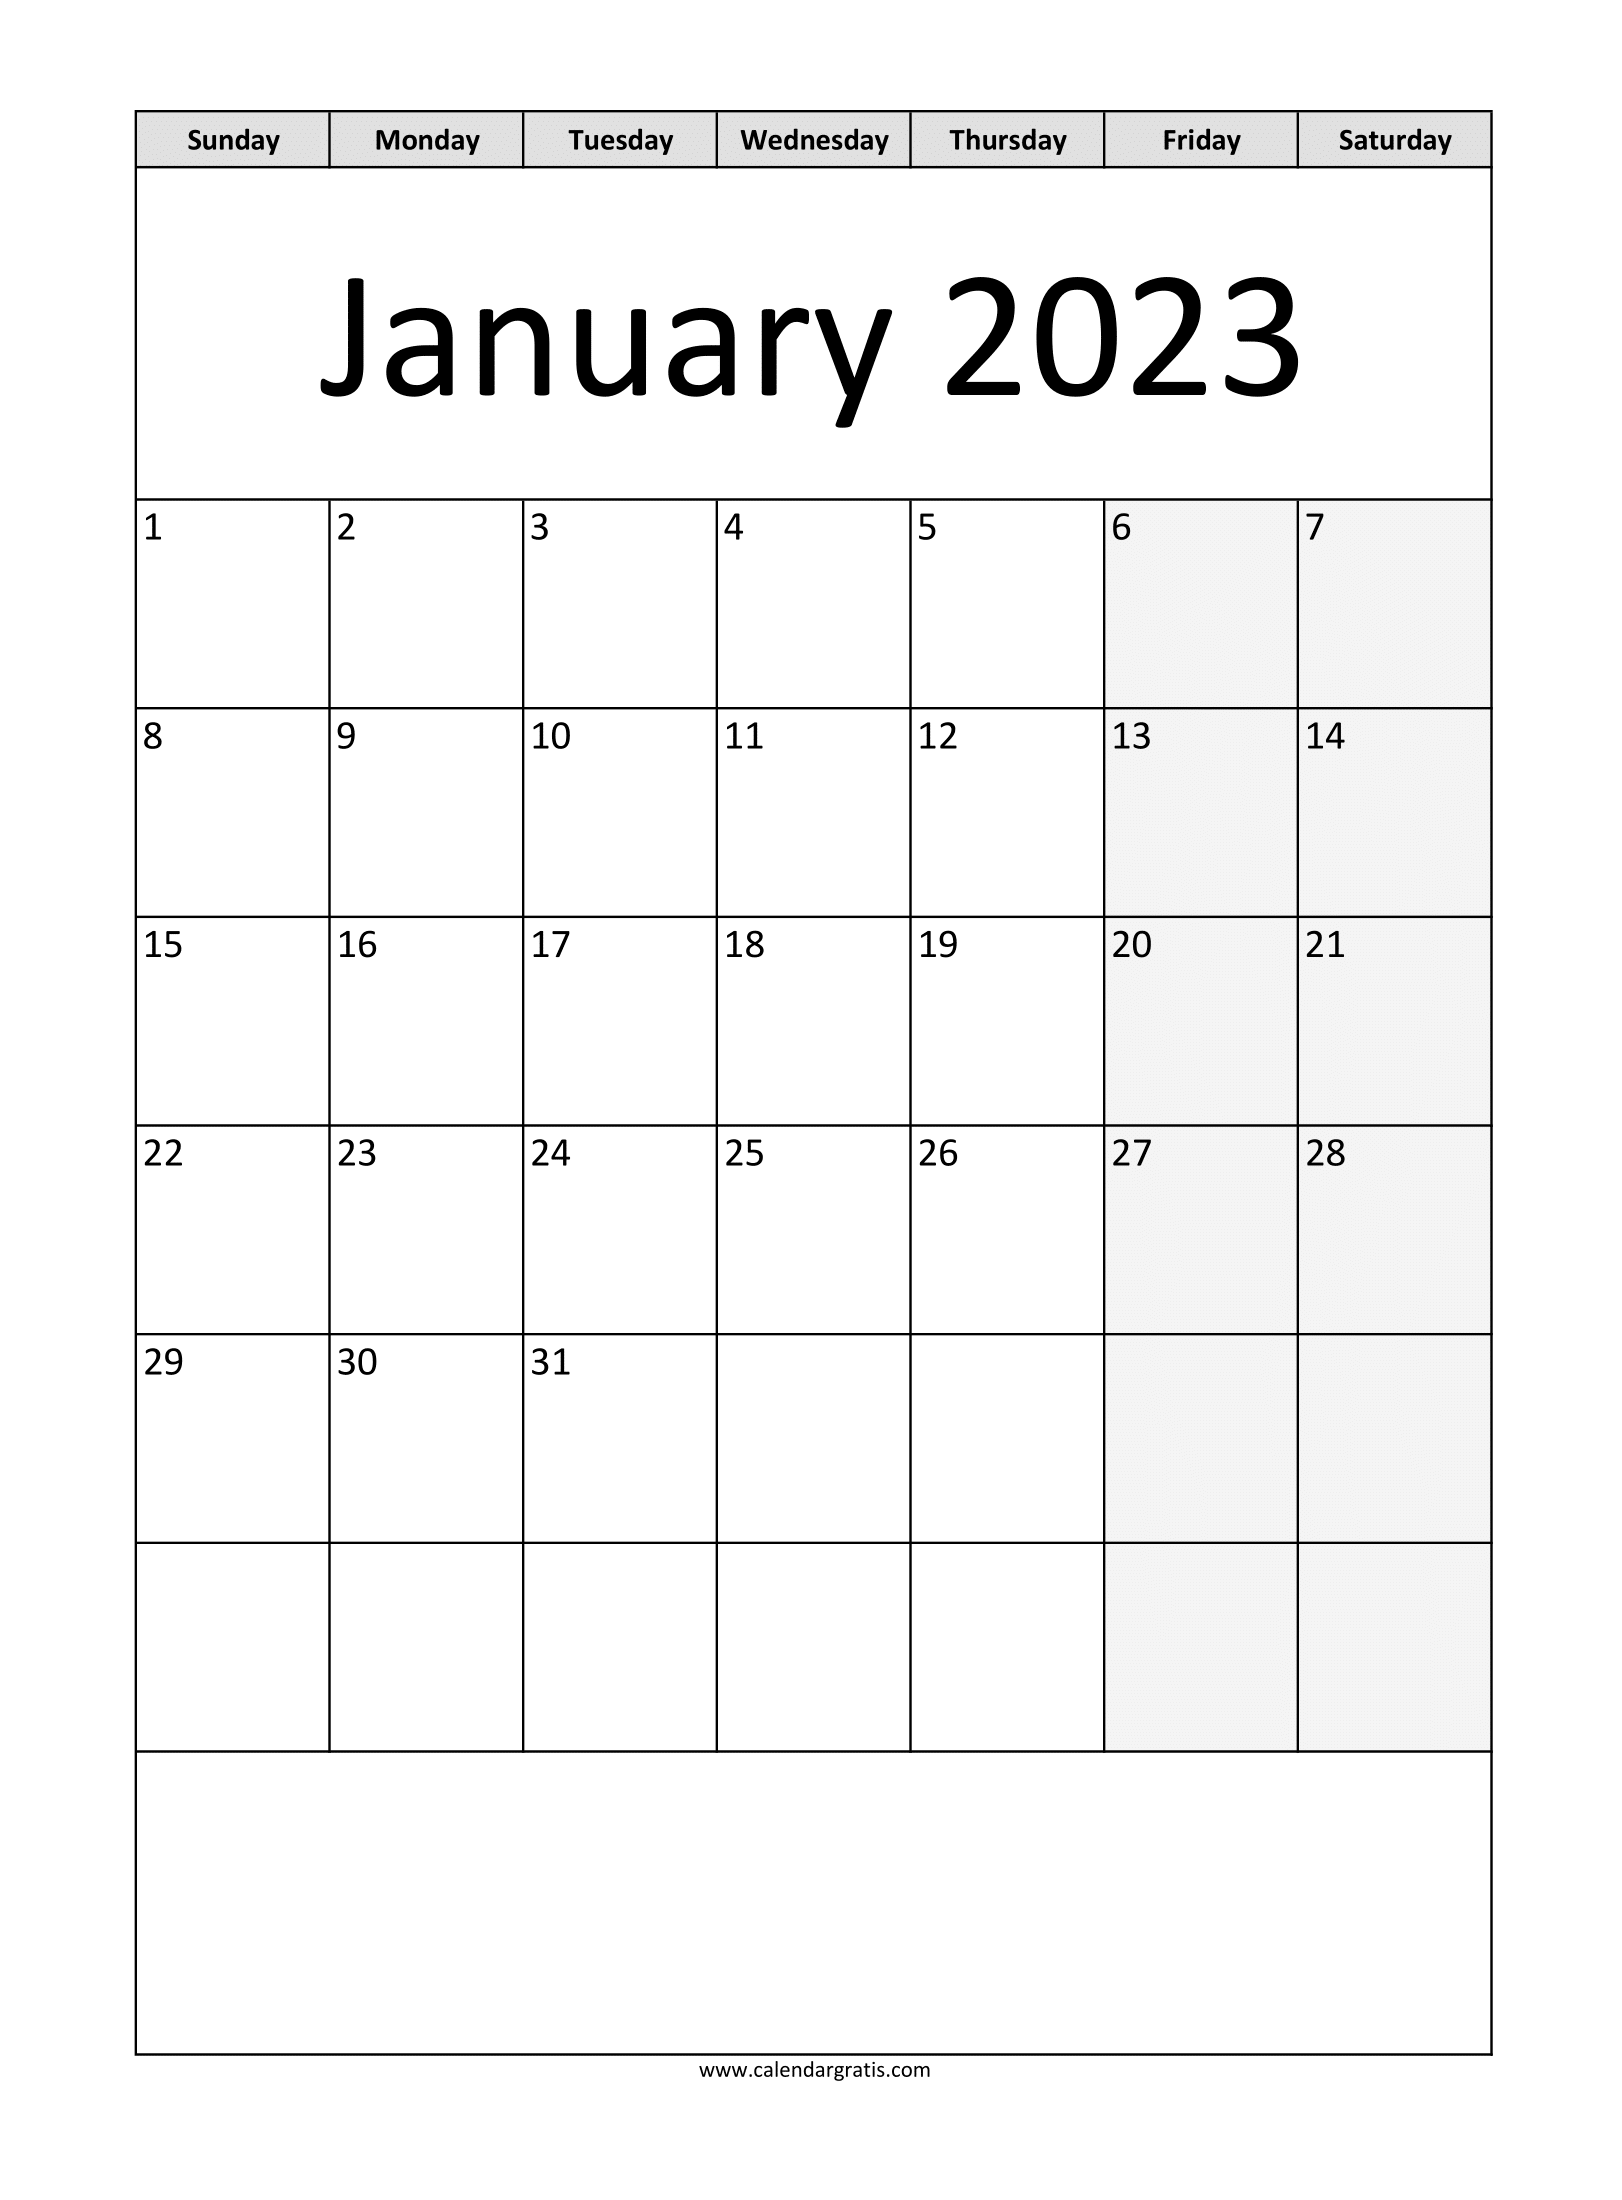 Print free January 2023 A4 size vertical calendar template. Mark special dates and add festivals and events in the notes section.